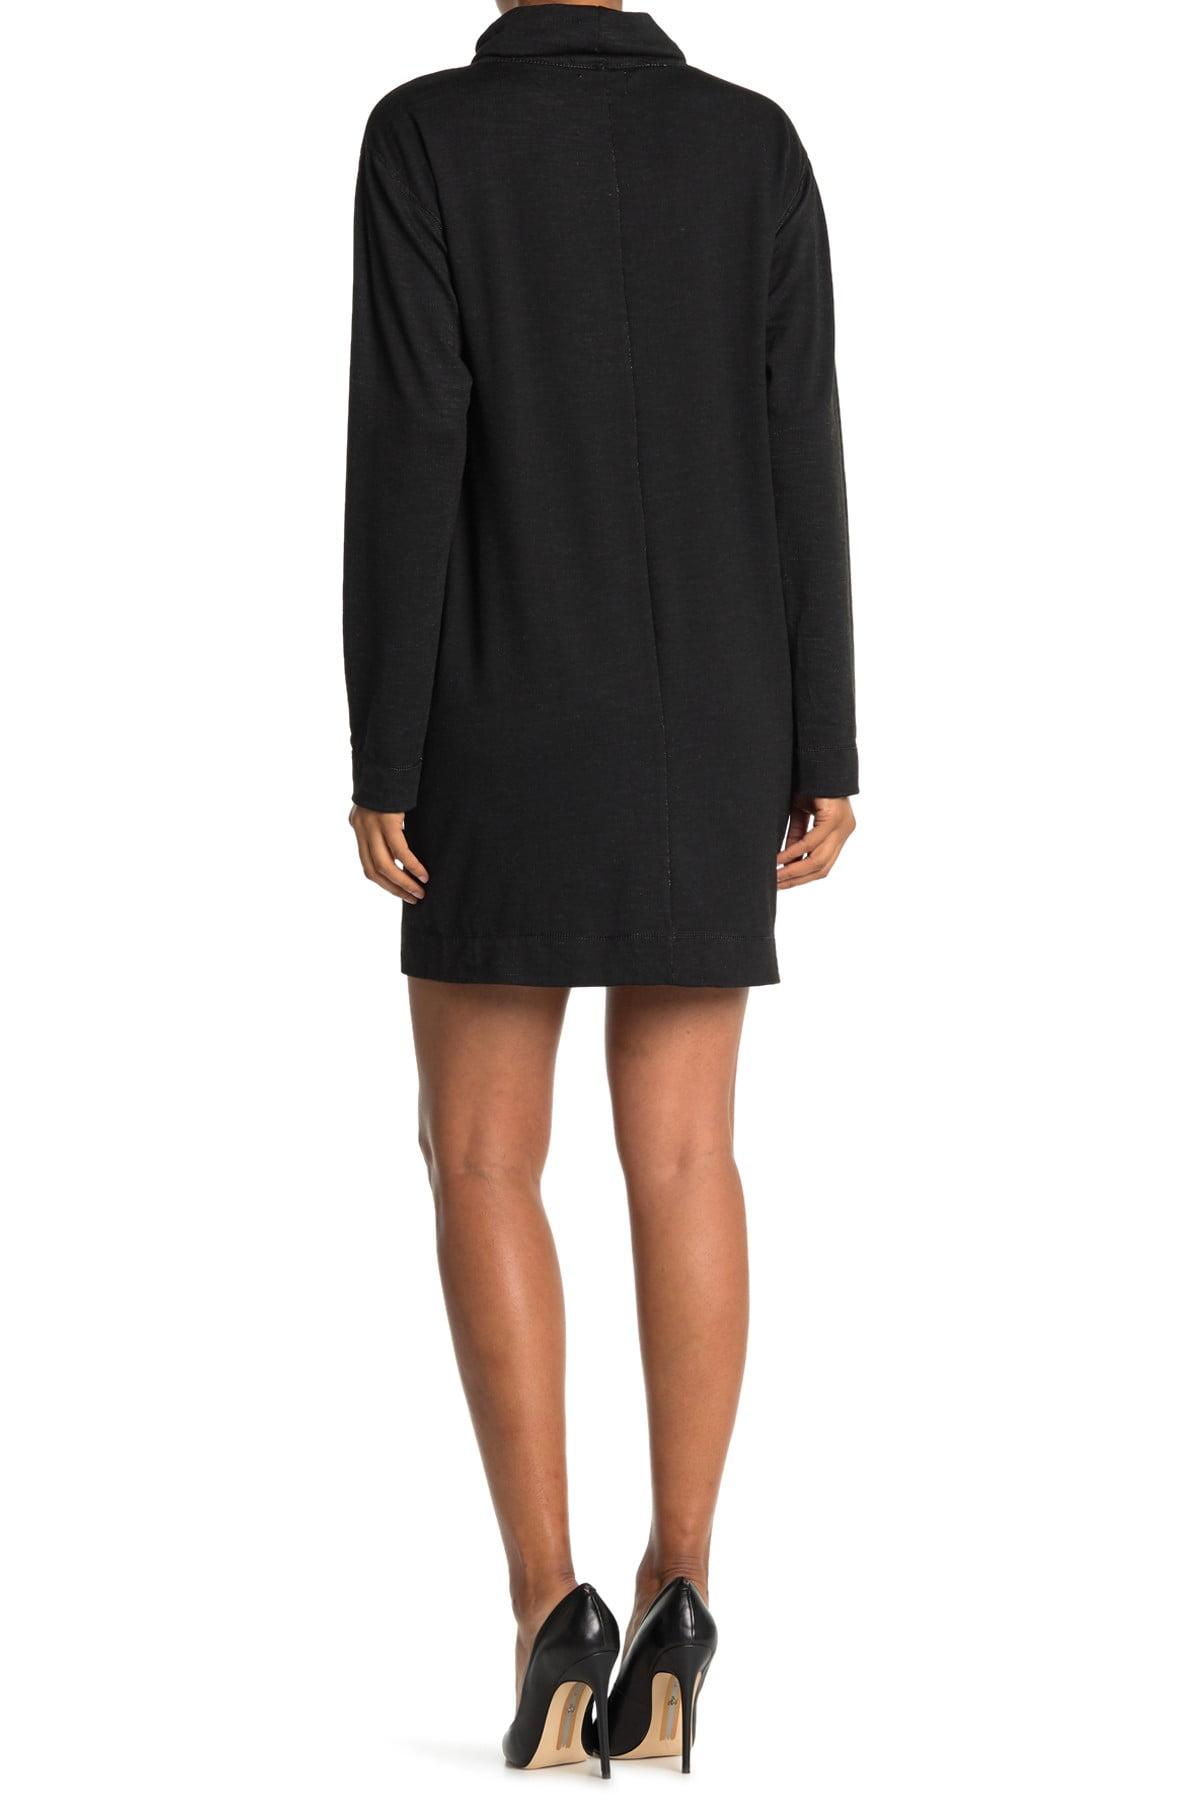 Max Studio Synthetic Drawstring Cowl Neck Knit Dress in Black - Lyst